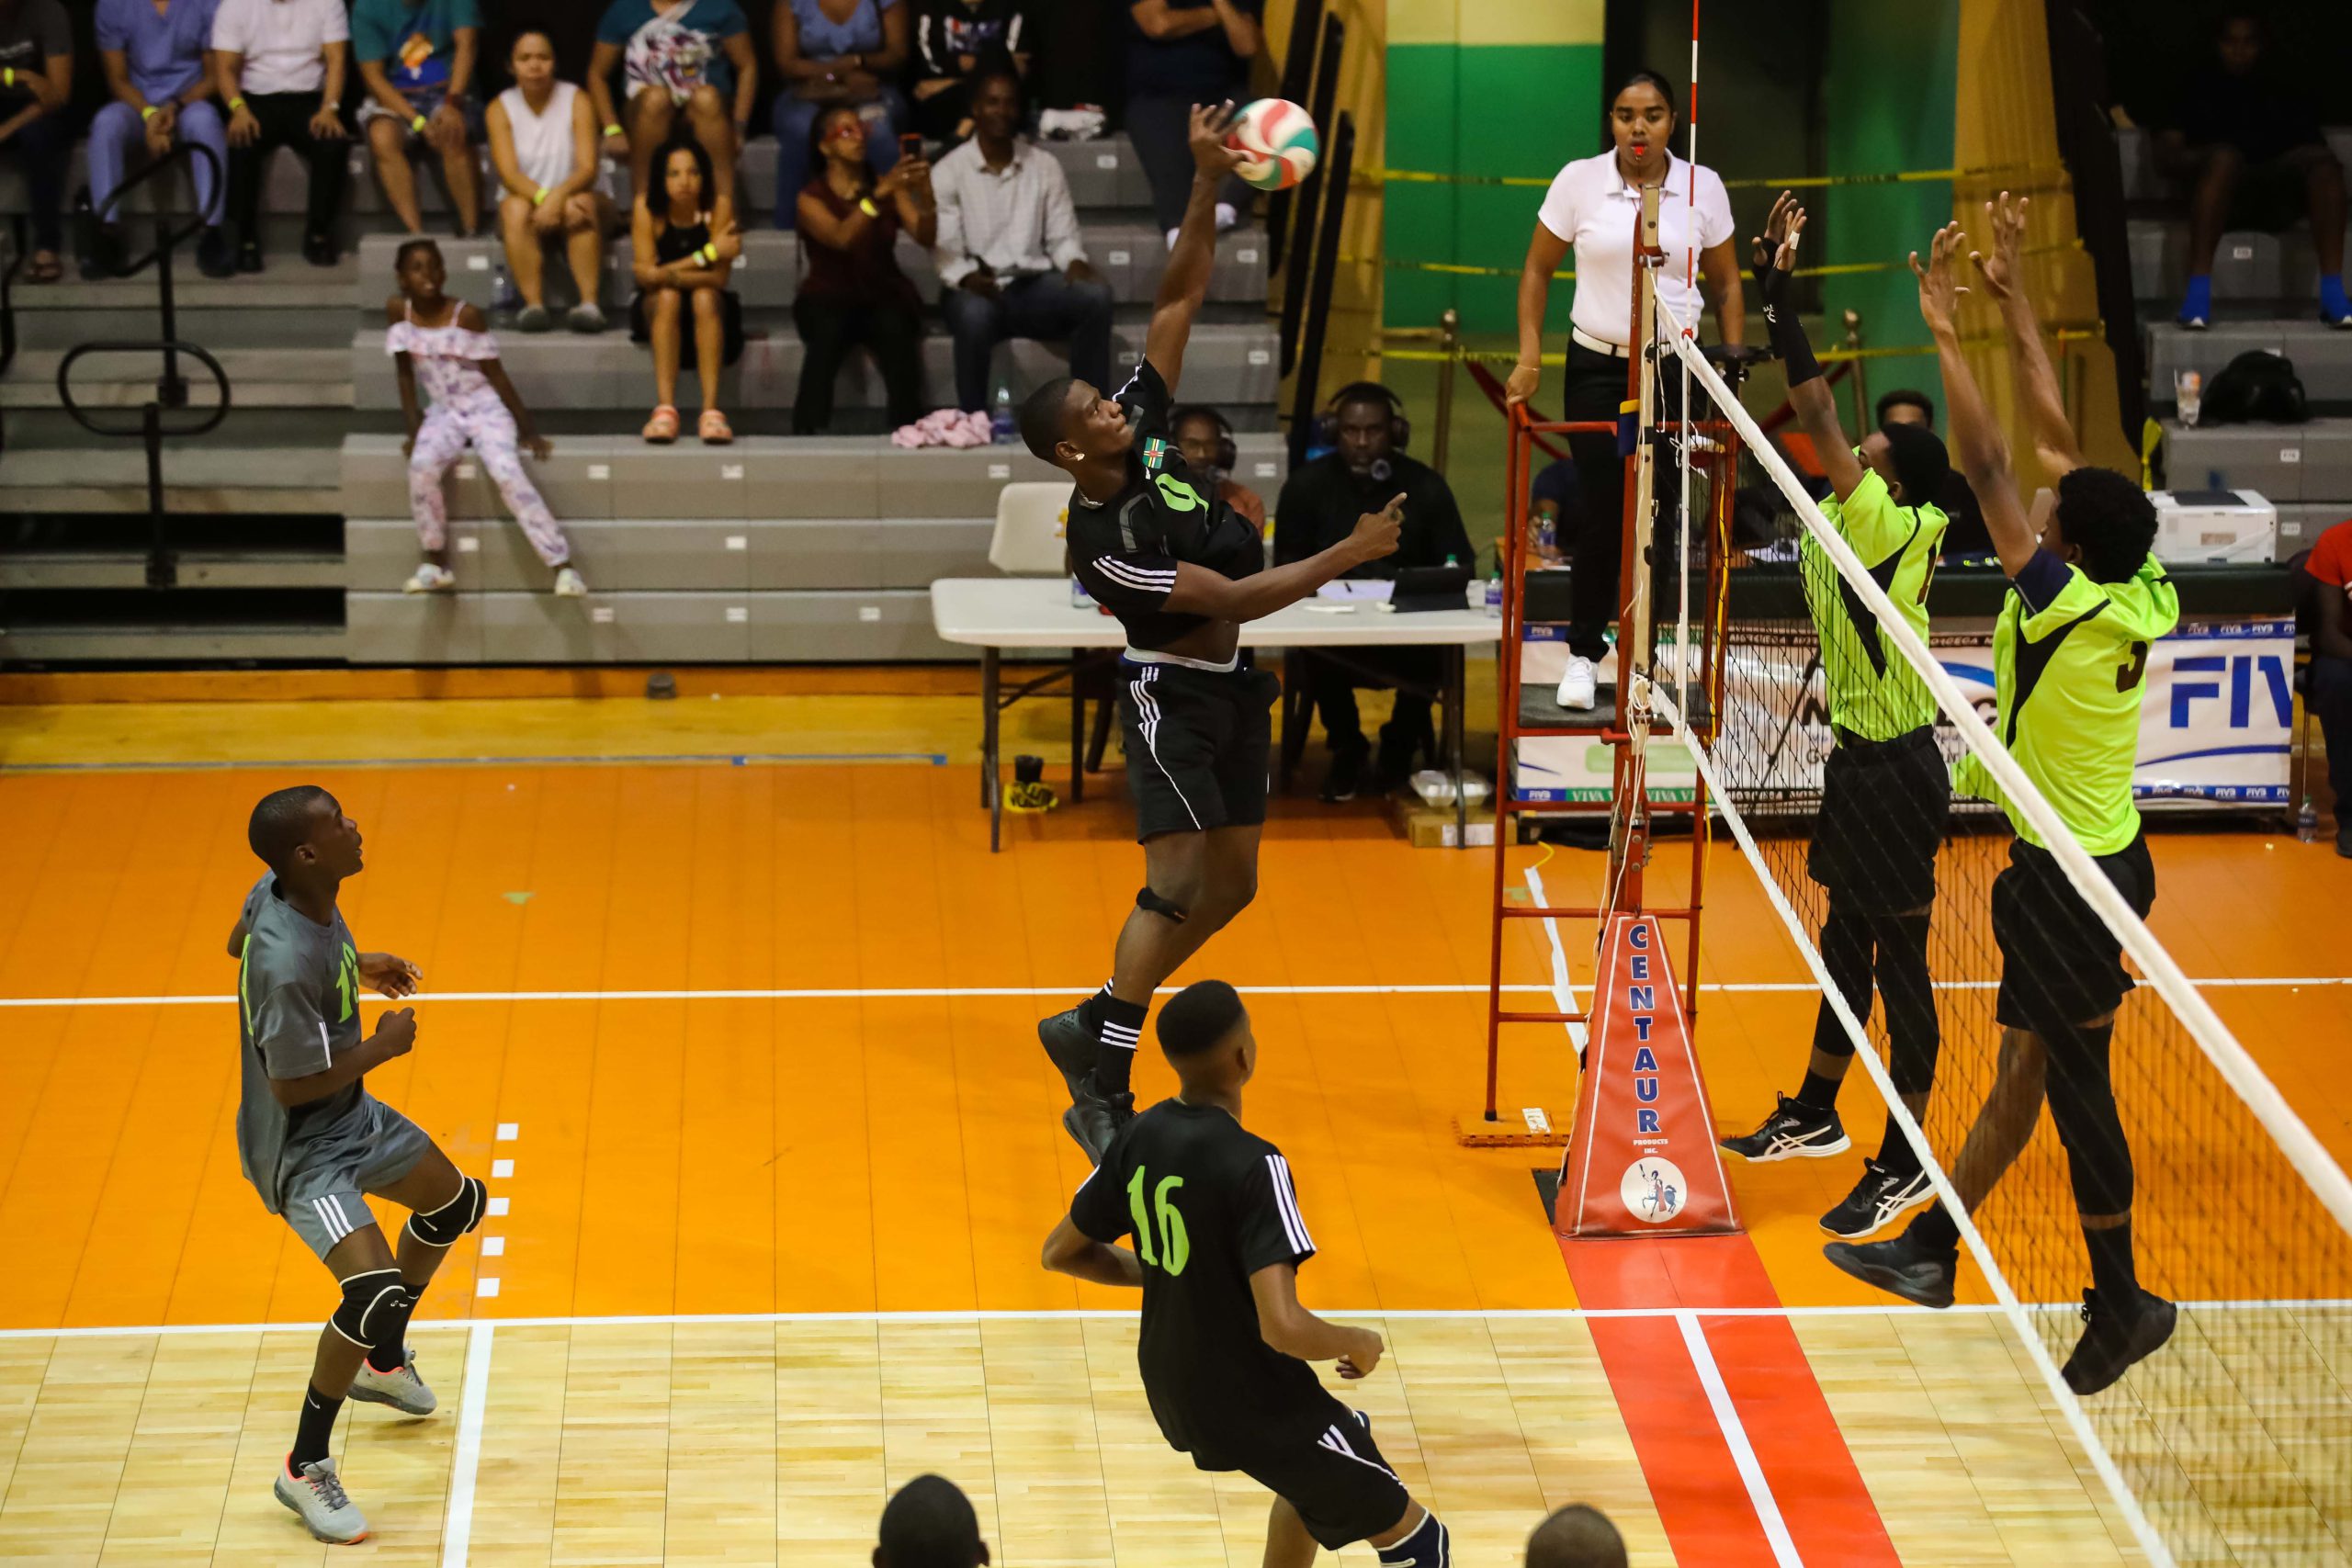 Second win in as many games for Dominica